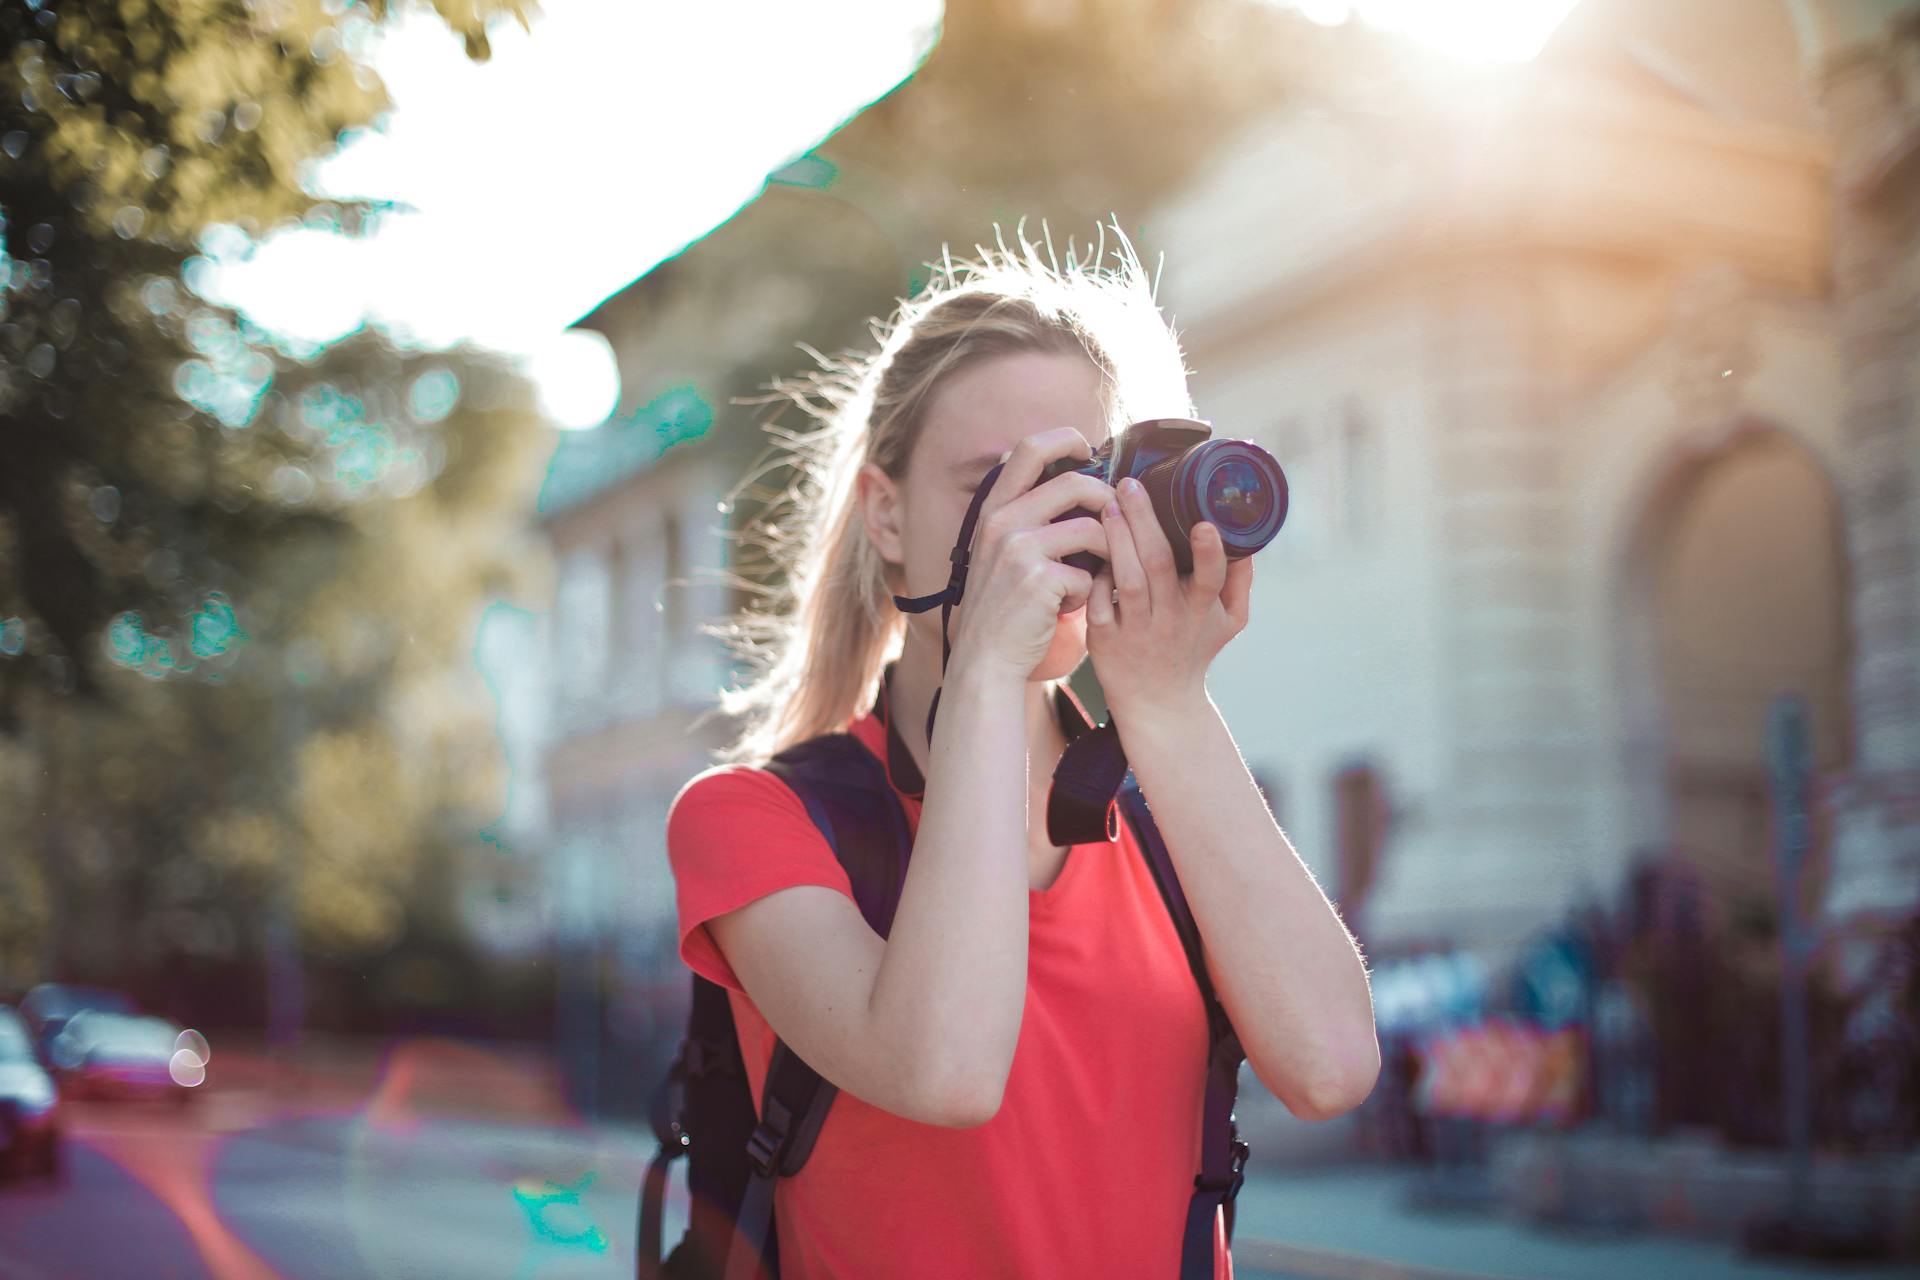 A woman clicking a picture using a DSLR camera | Source: Pexels